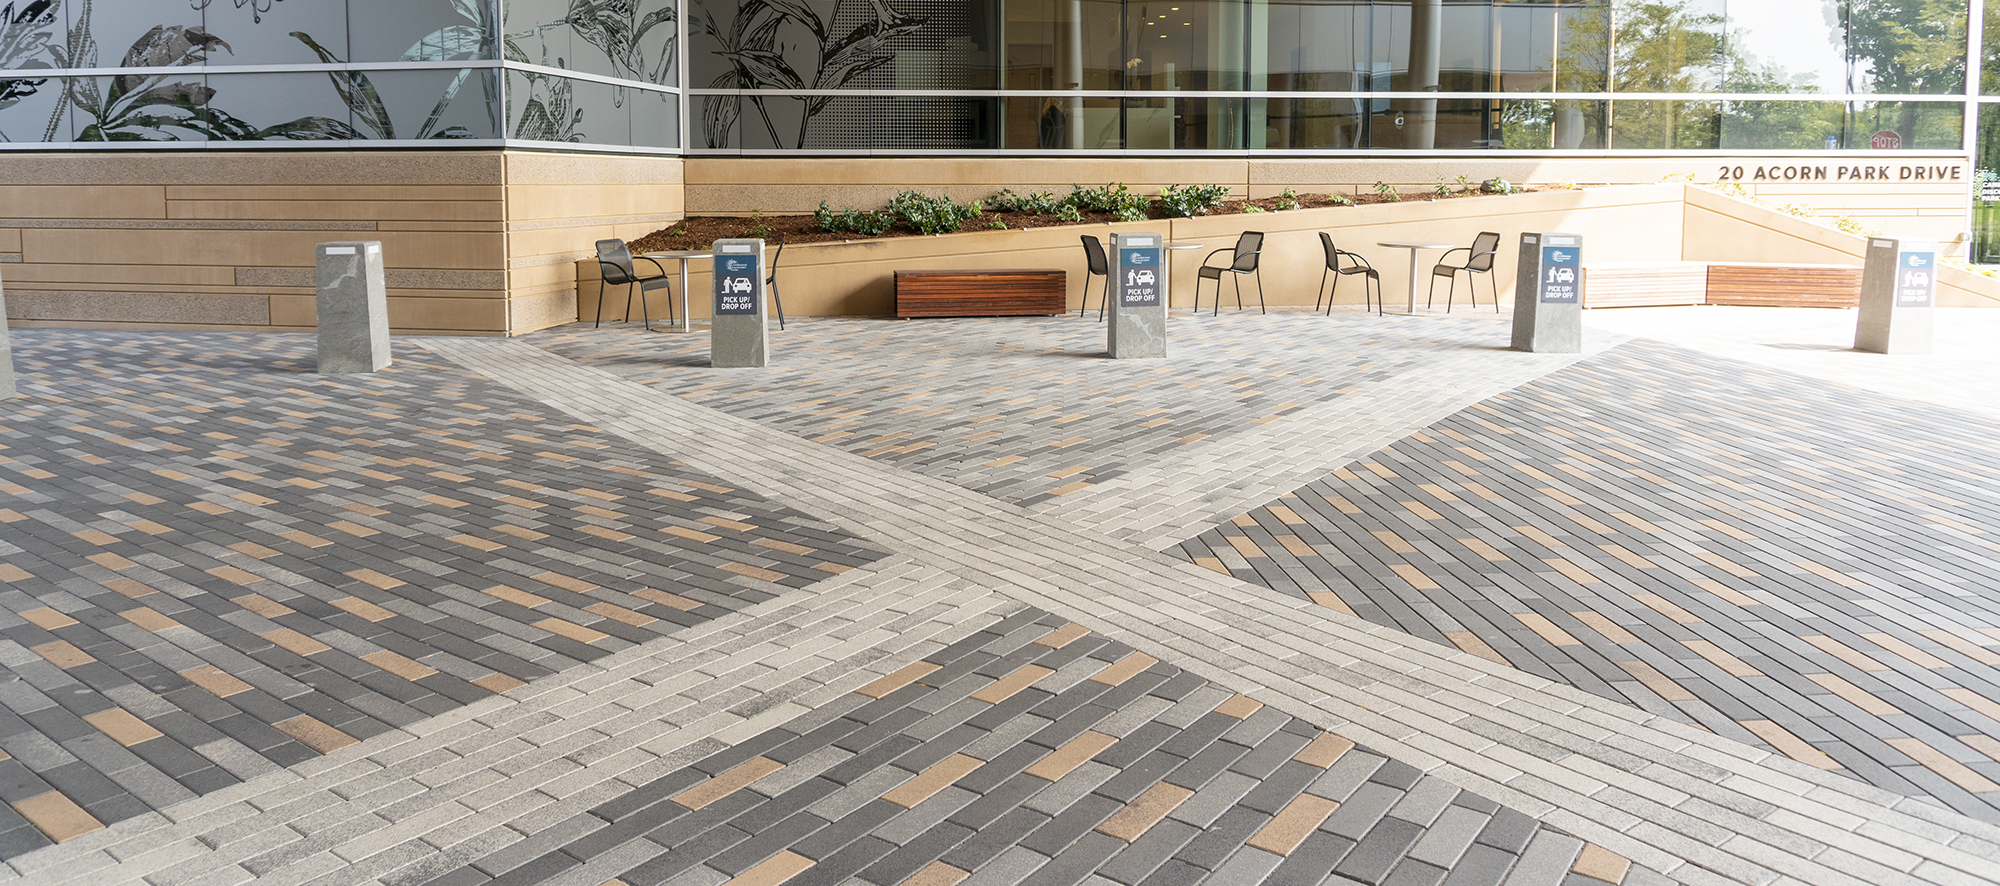 Promenade Plank pavers in three hues with a white X-shaped paver design cutting through the pattern, in front of a beige-grey building.